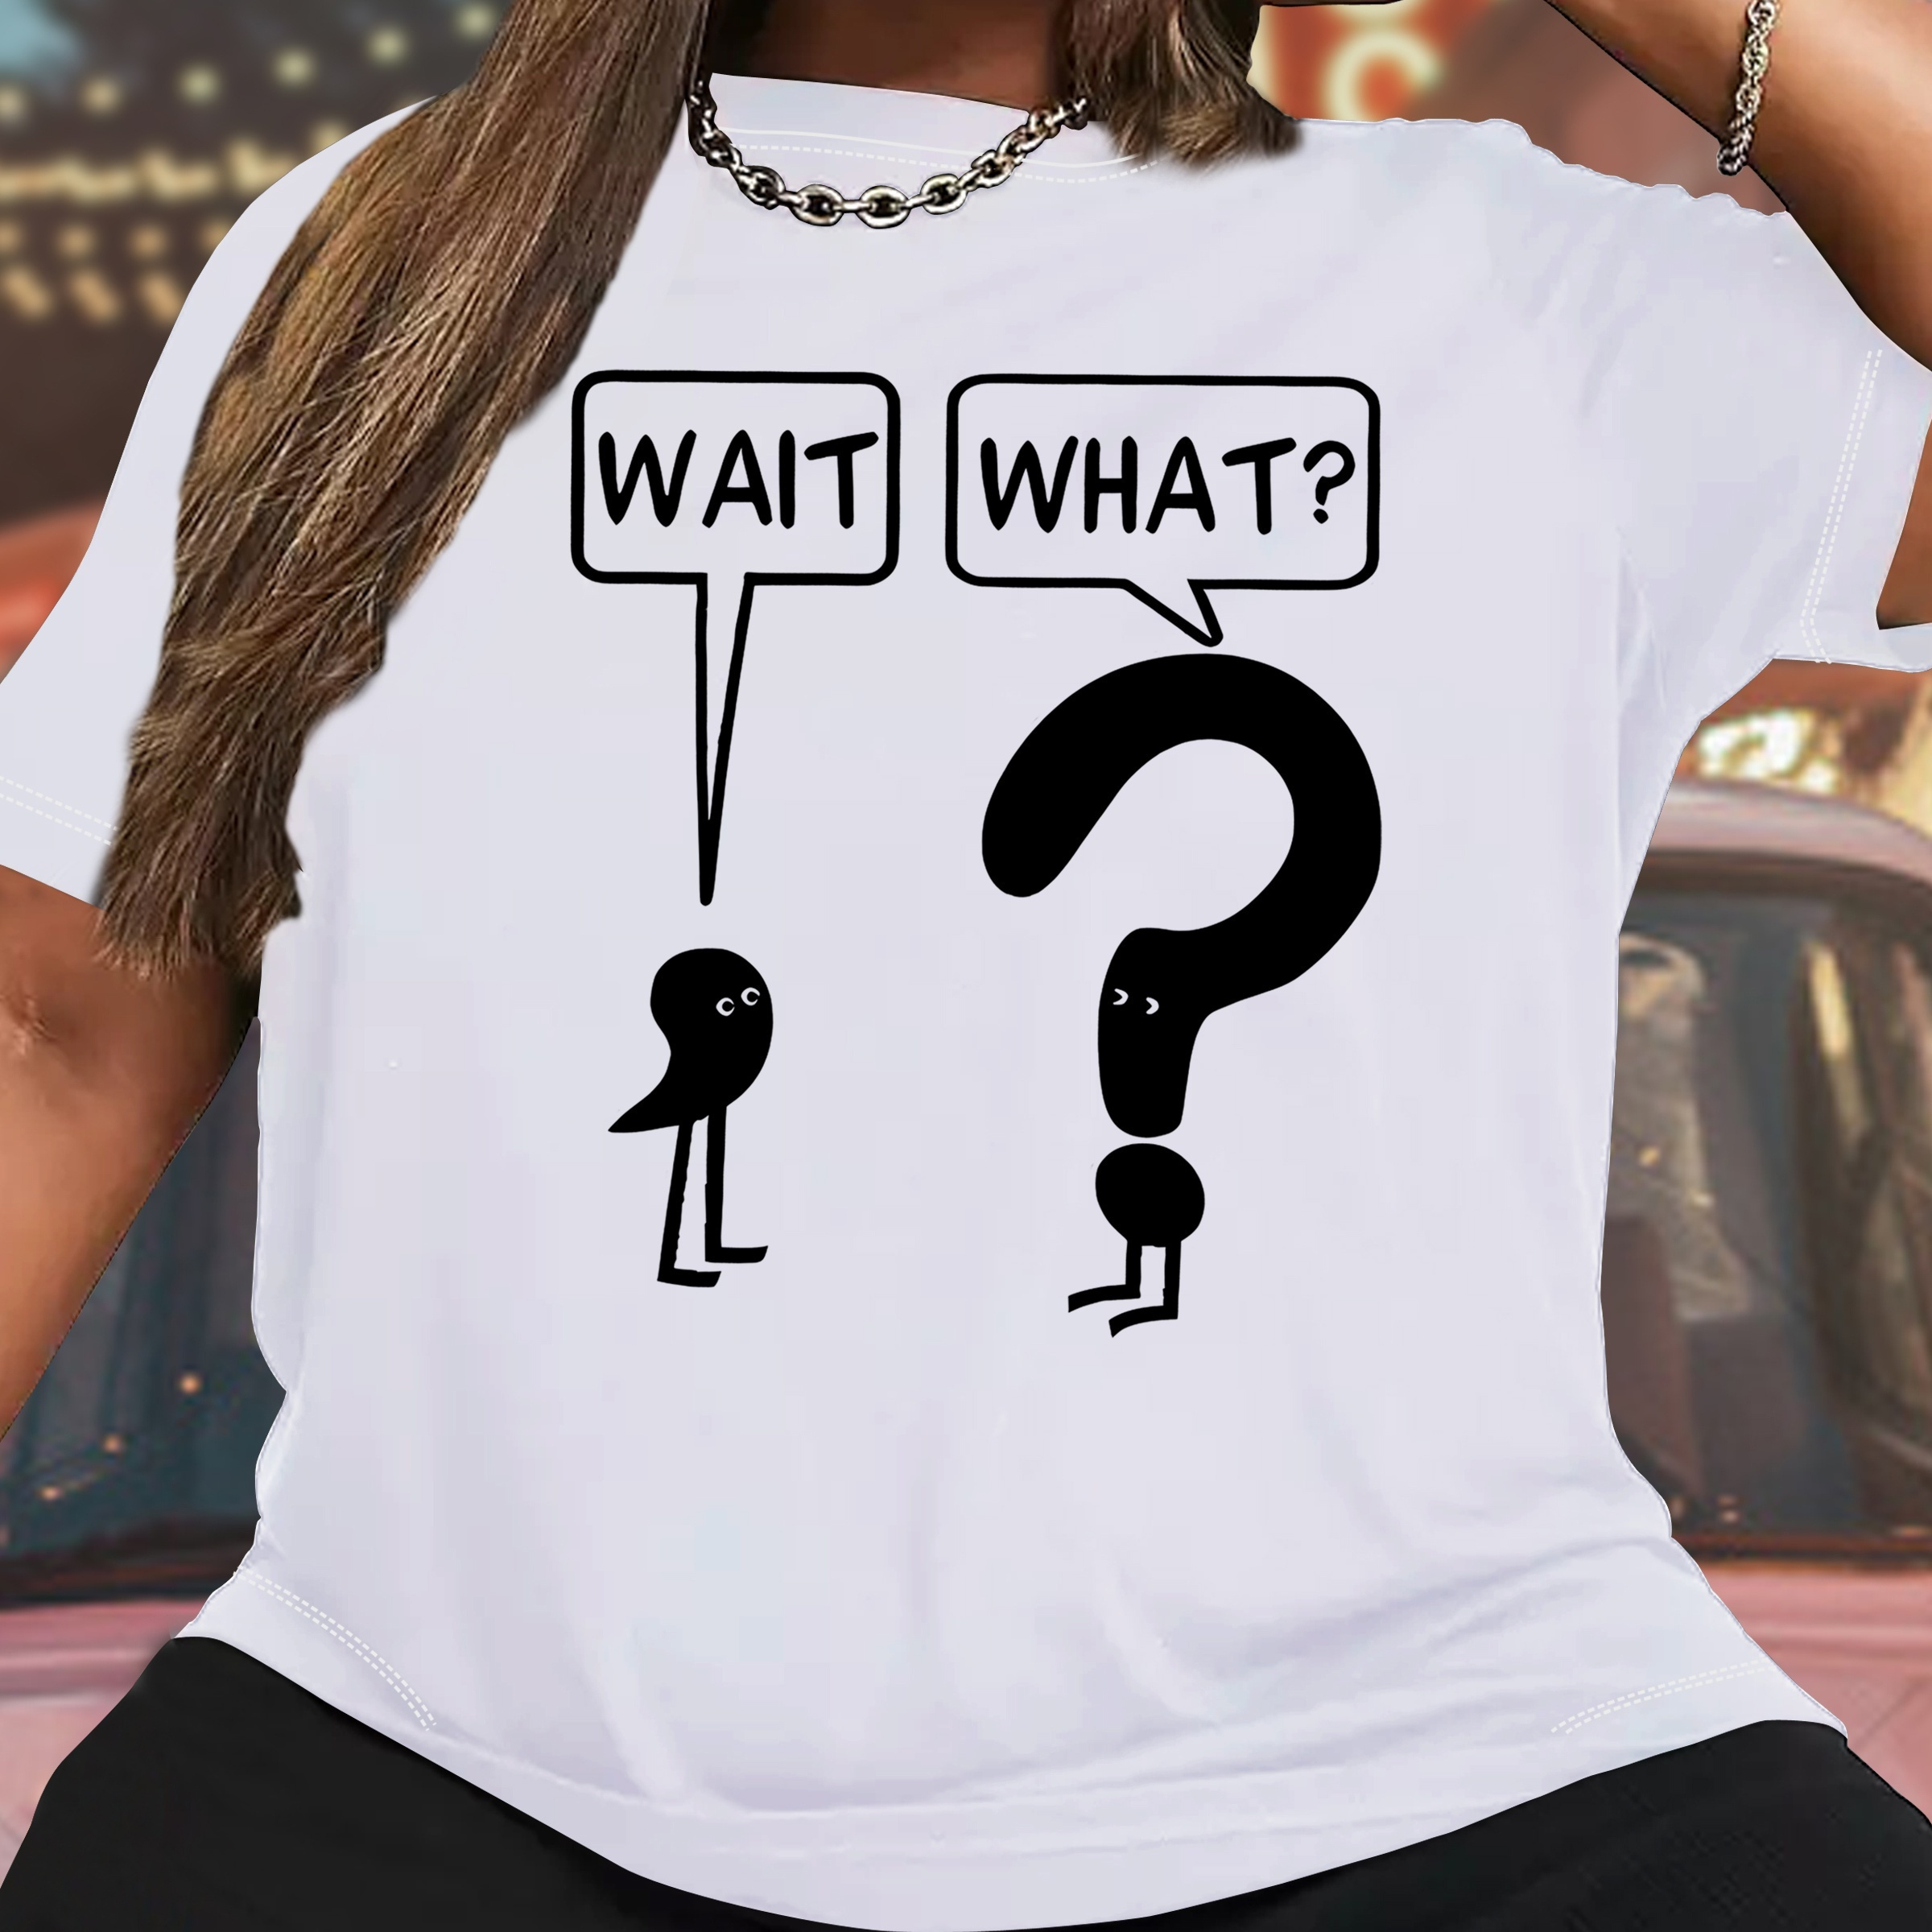 

Women's Casual Sports T-shirt Top, Plus Size Wait What Comma Question Mark Print Stretchy Round Neck Breathable Fabric Short Sleeve Fitness Tee Top